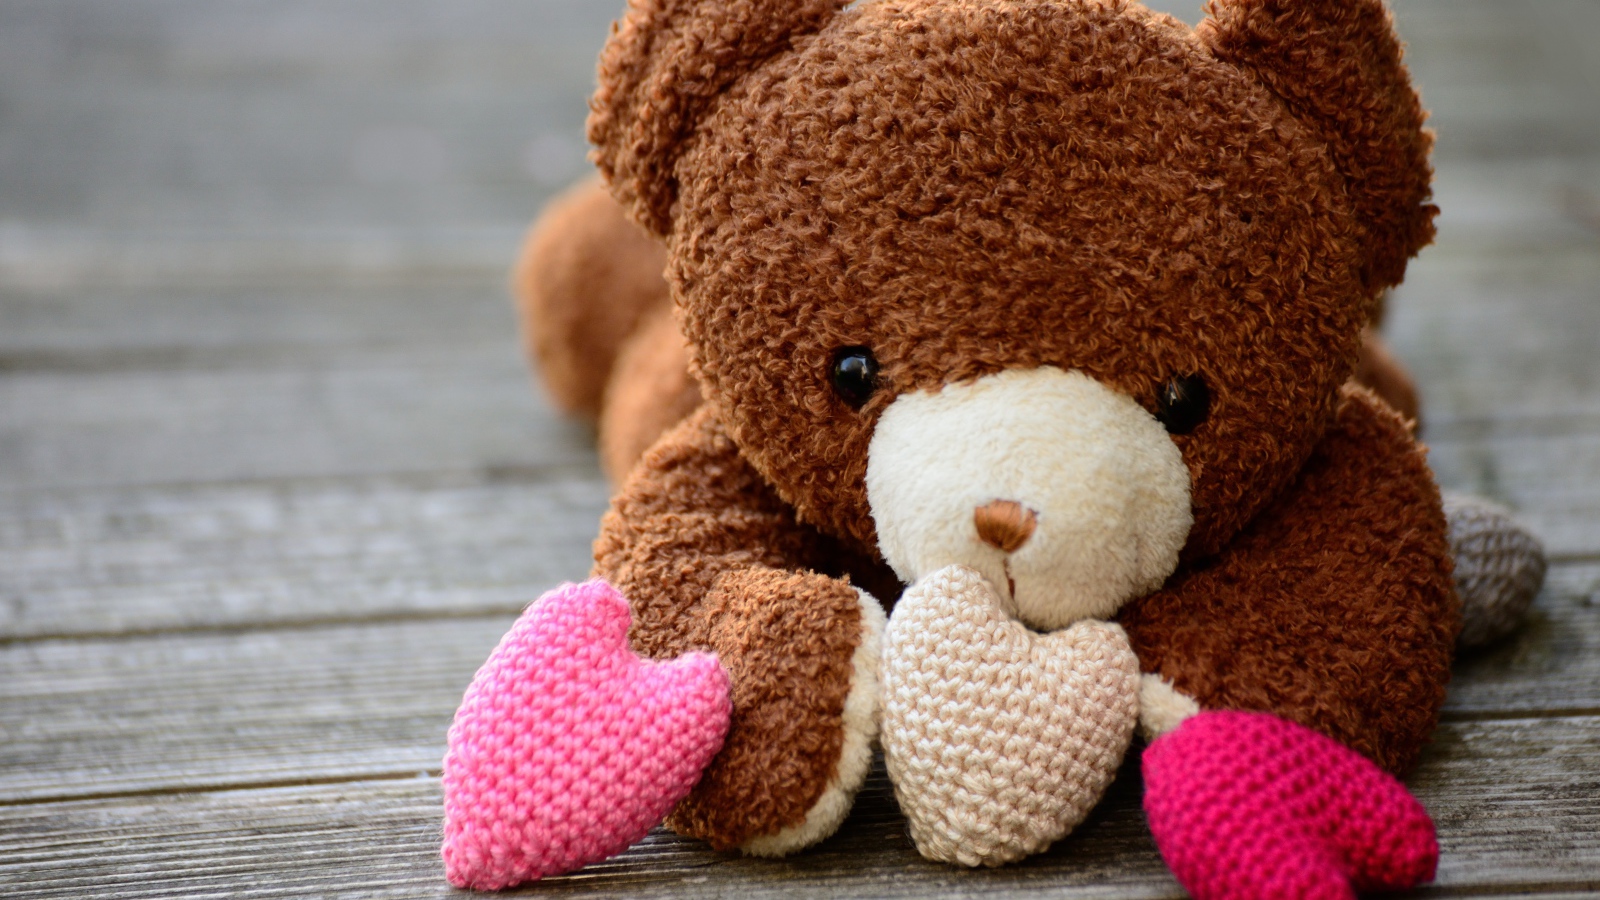 Teddy bear with knitted hearts